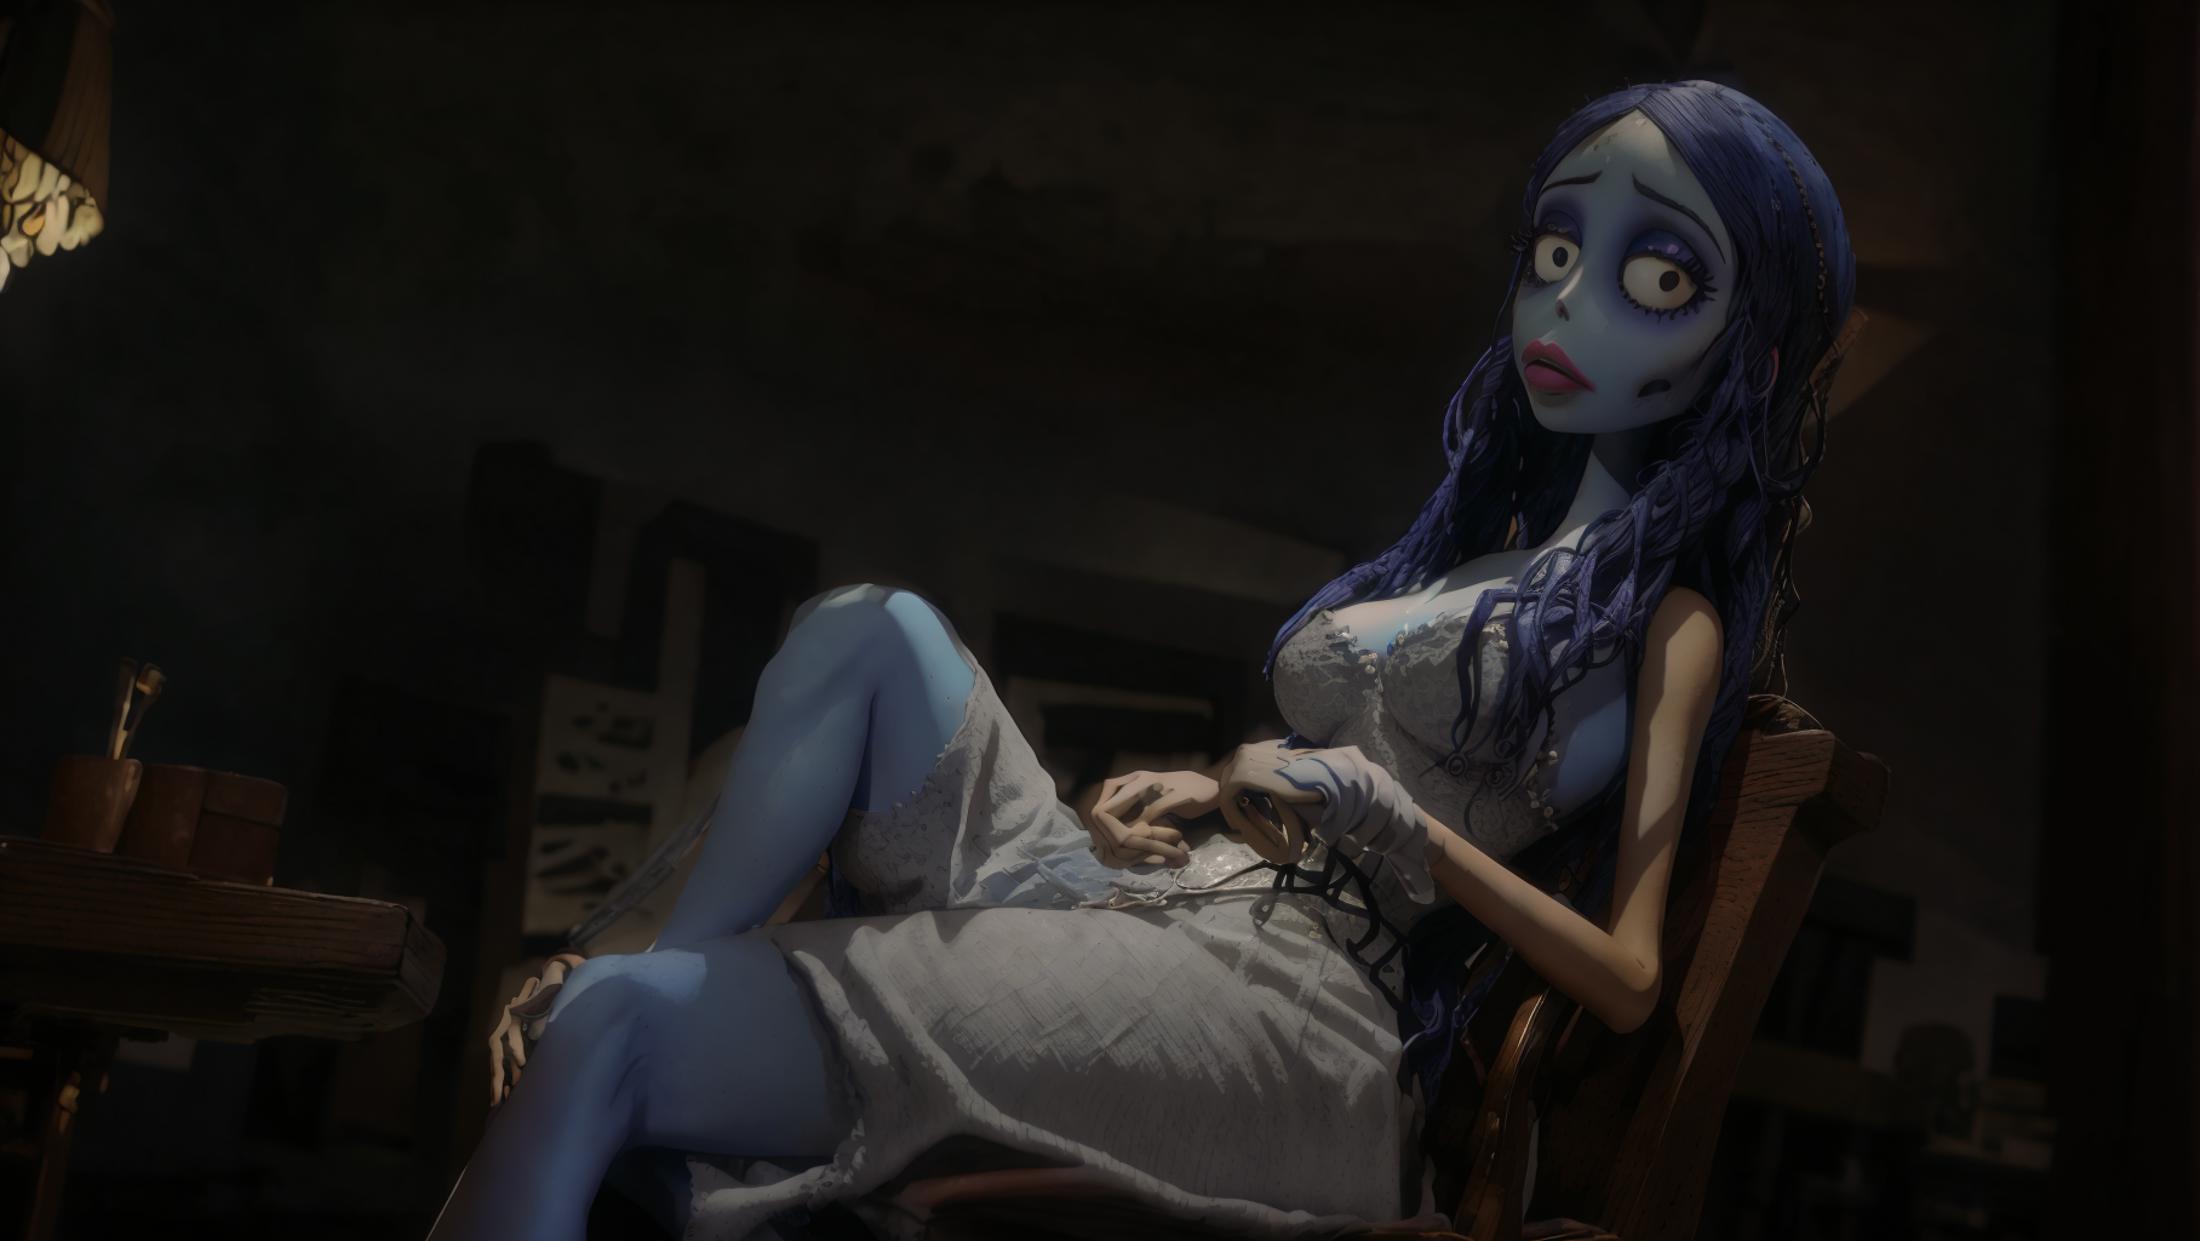 Emily The Corpse Bride image by sabi123456